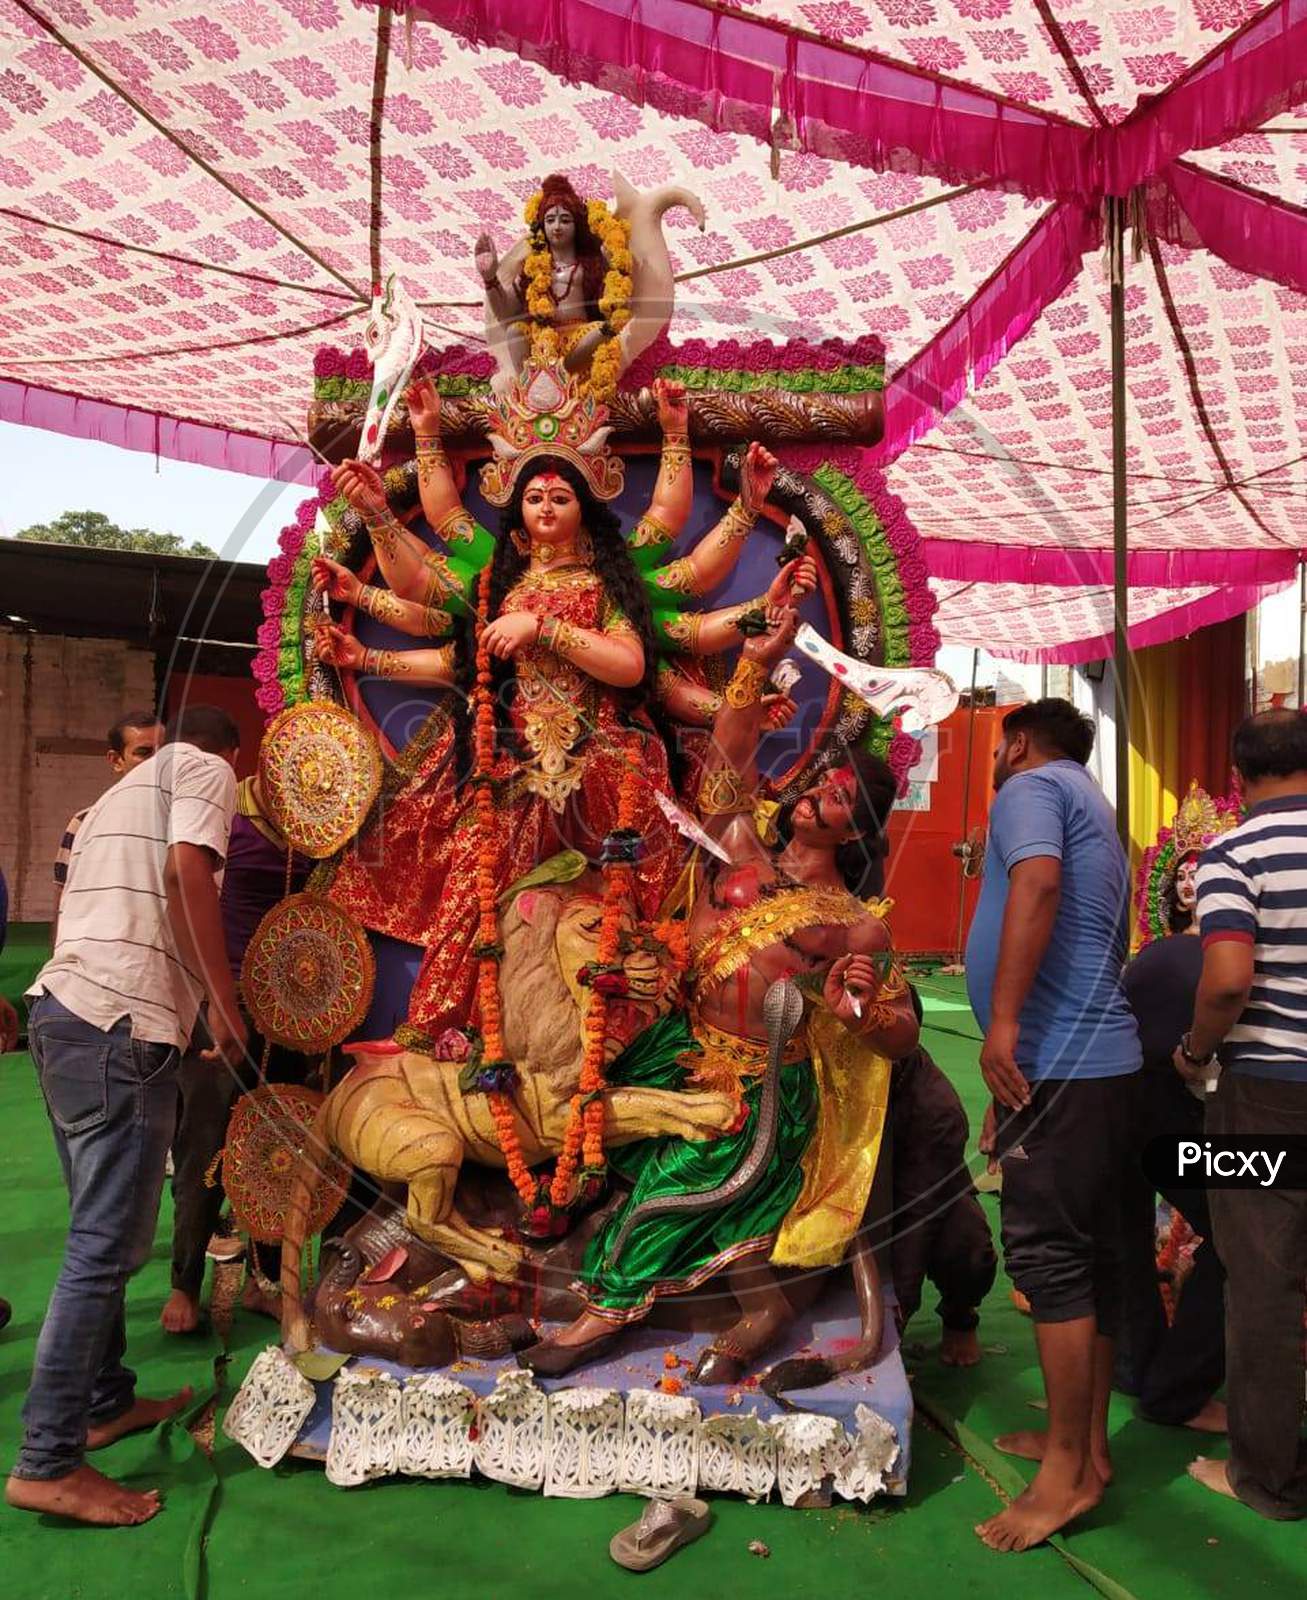 people lifting an idol of Goddess Durga for immersion